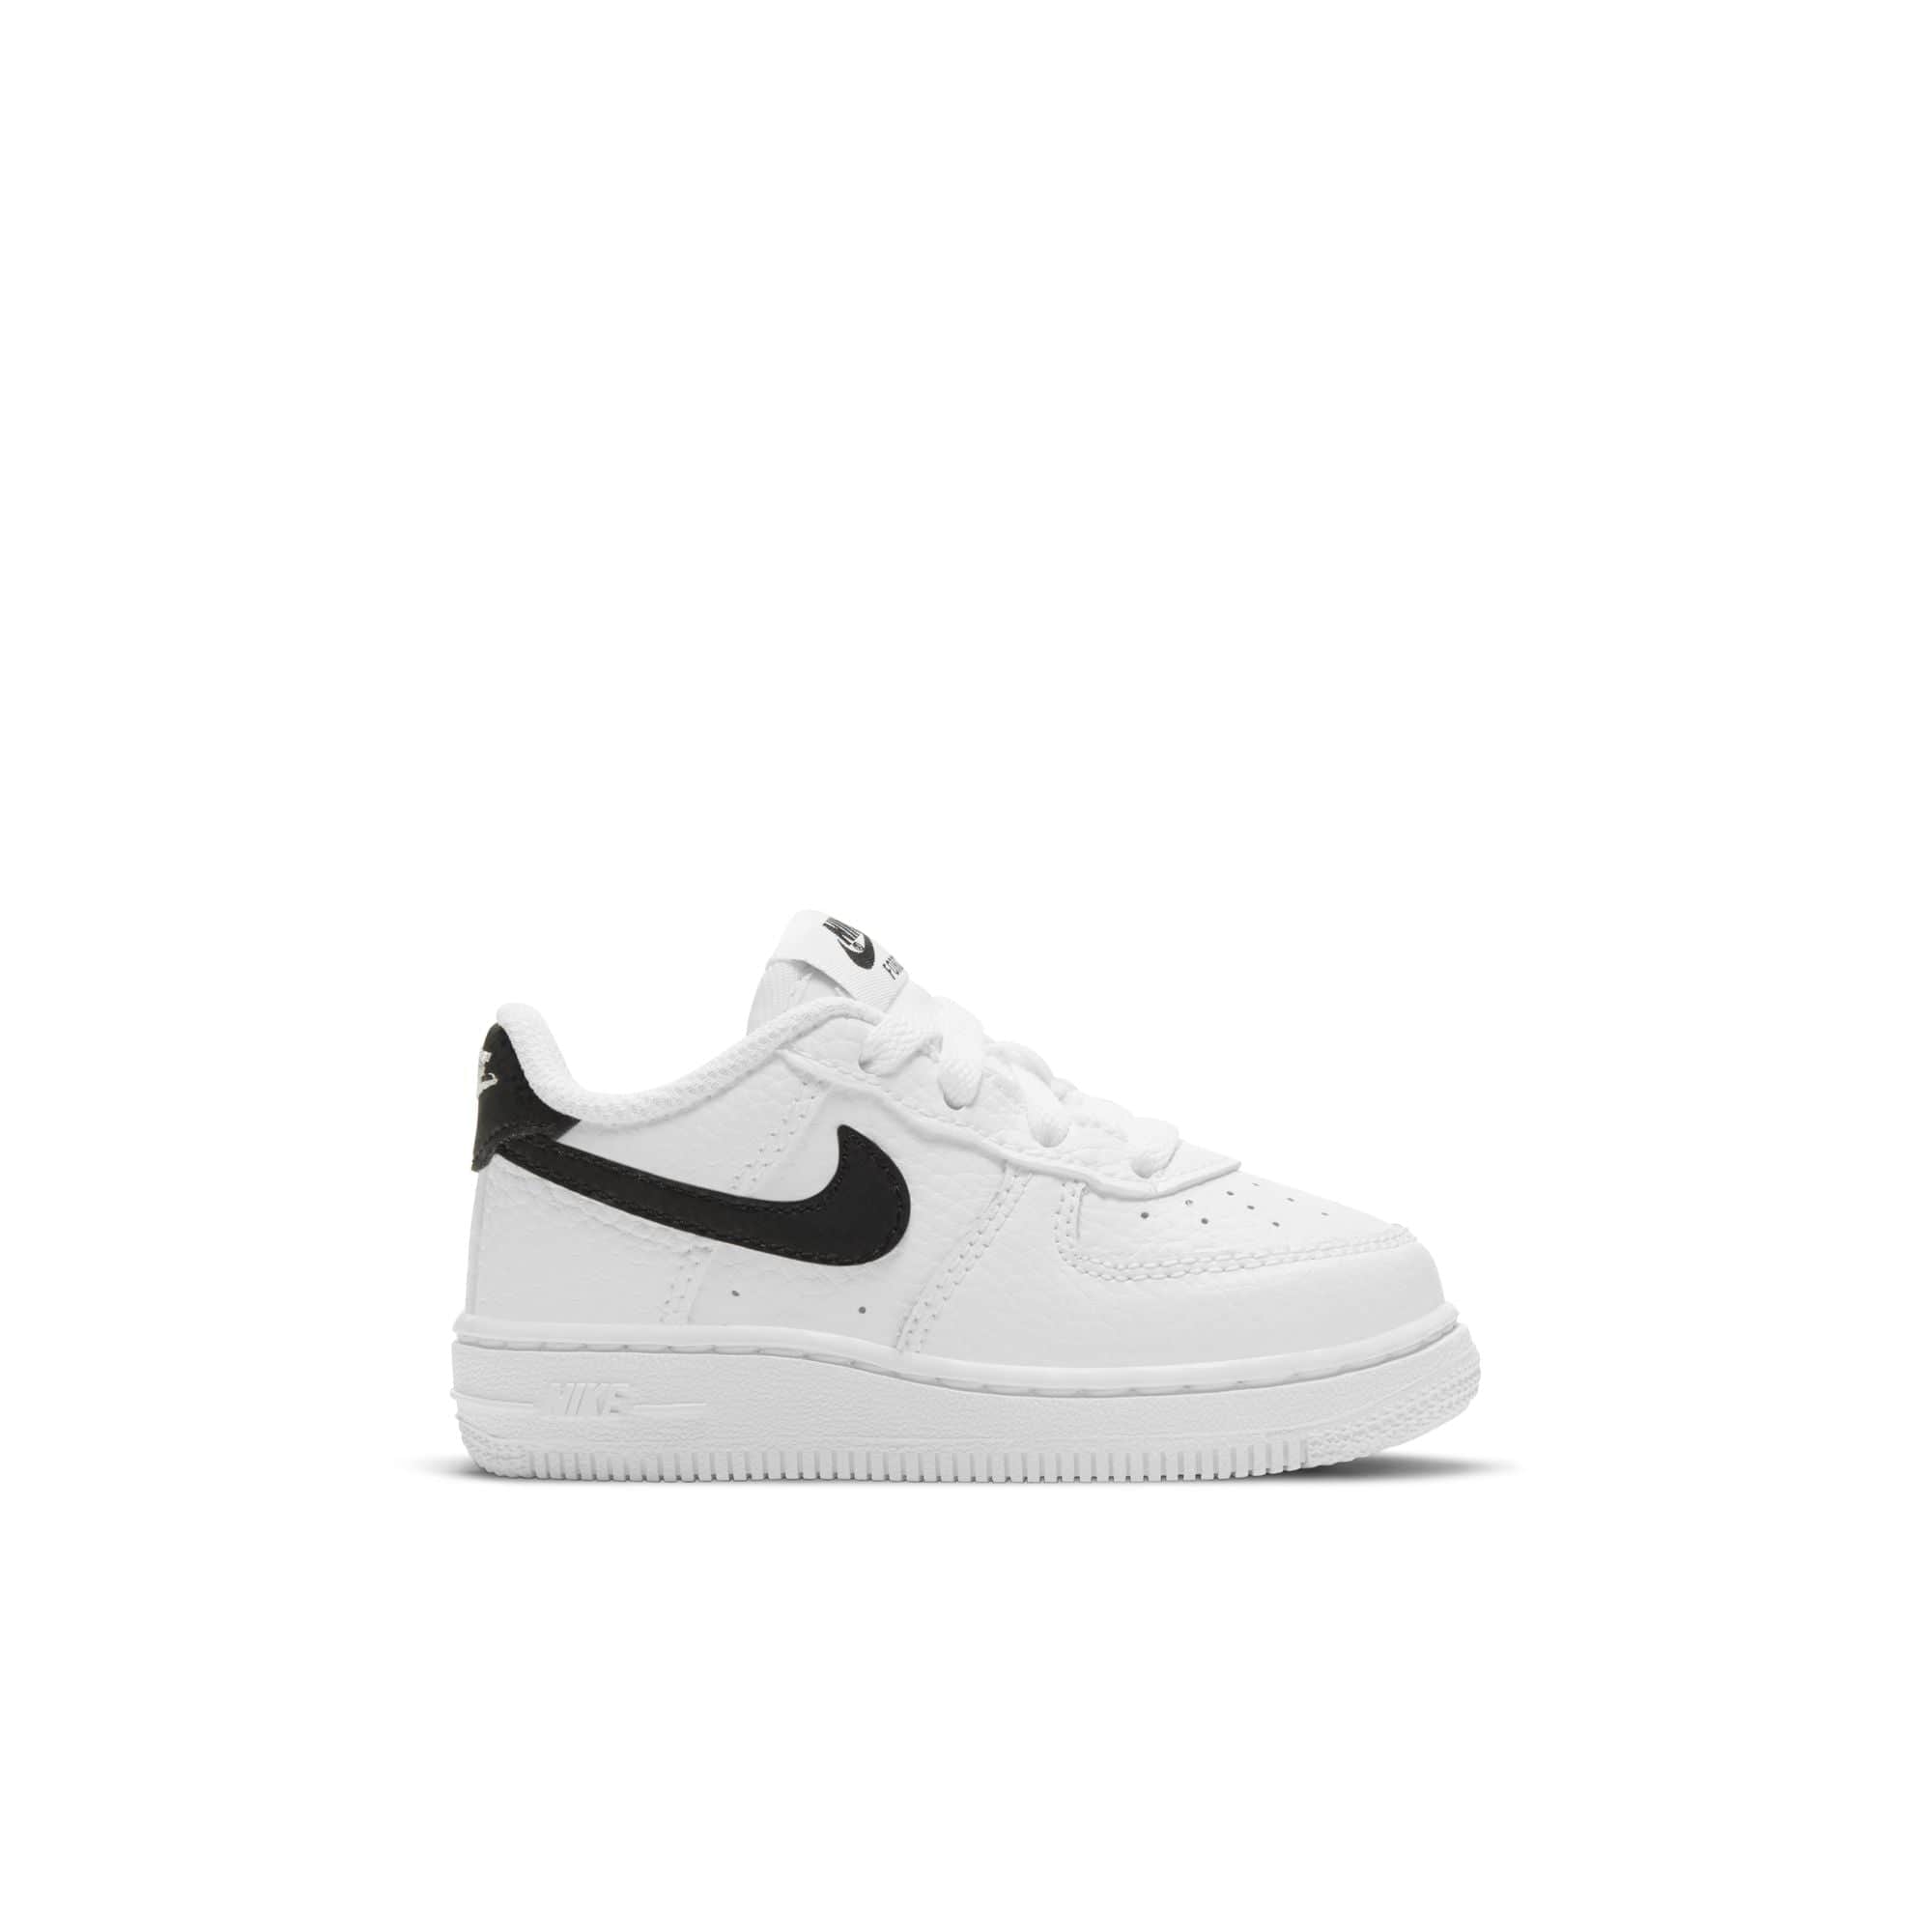 Nike Air Force 1 Low White Black Swoosh - Toddler's TD GBNY